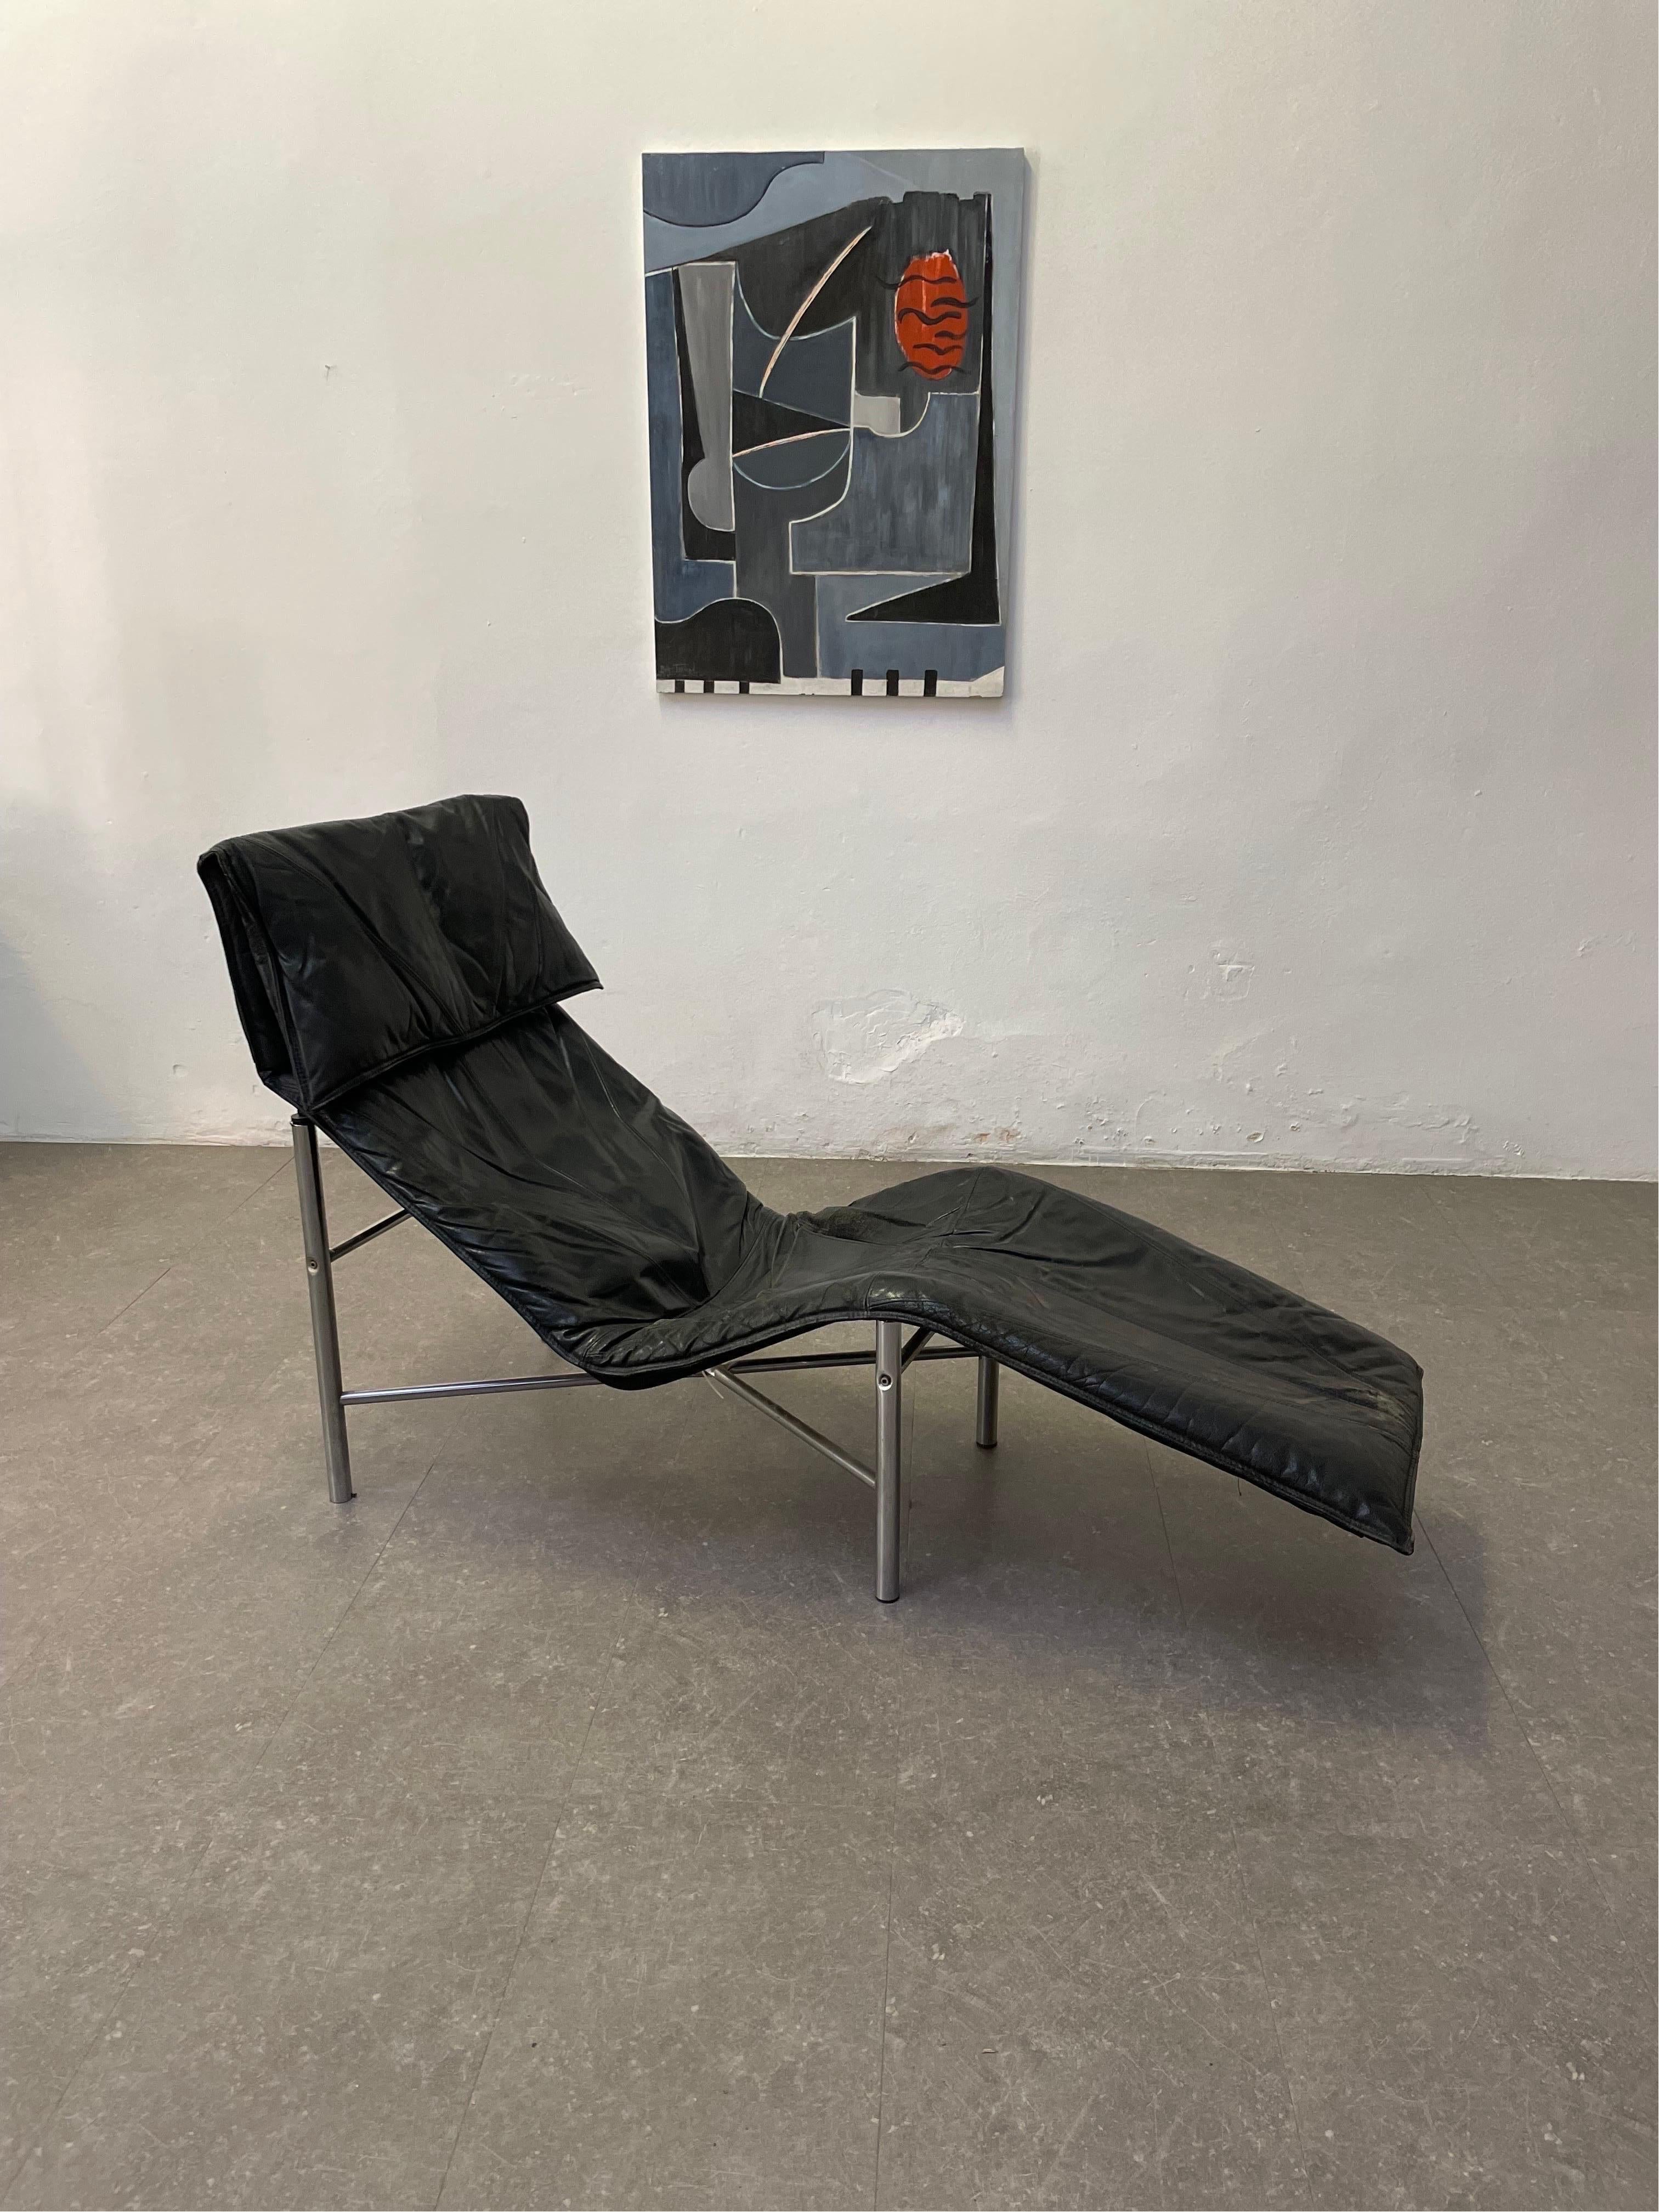 This beautiful Black Leather ‘Skye’ Chaise Longue is a timeless piece designed by Tord Björklund for Ikea Sweden in the 1970s. Its sleek and modern design is crafted with the highest quality black leather that exudes luxury and sophistication. The